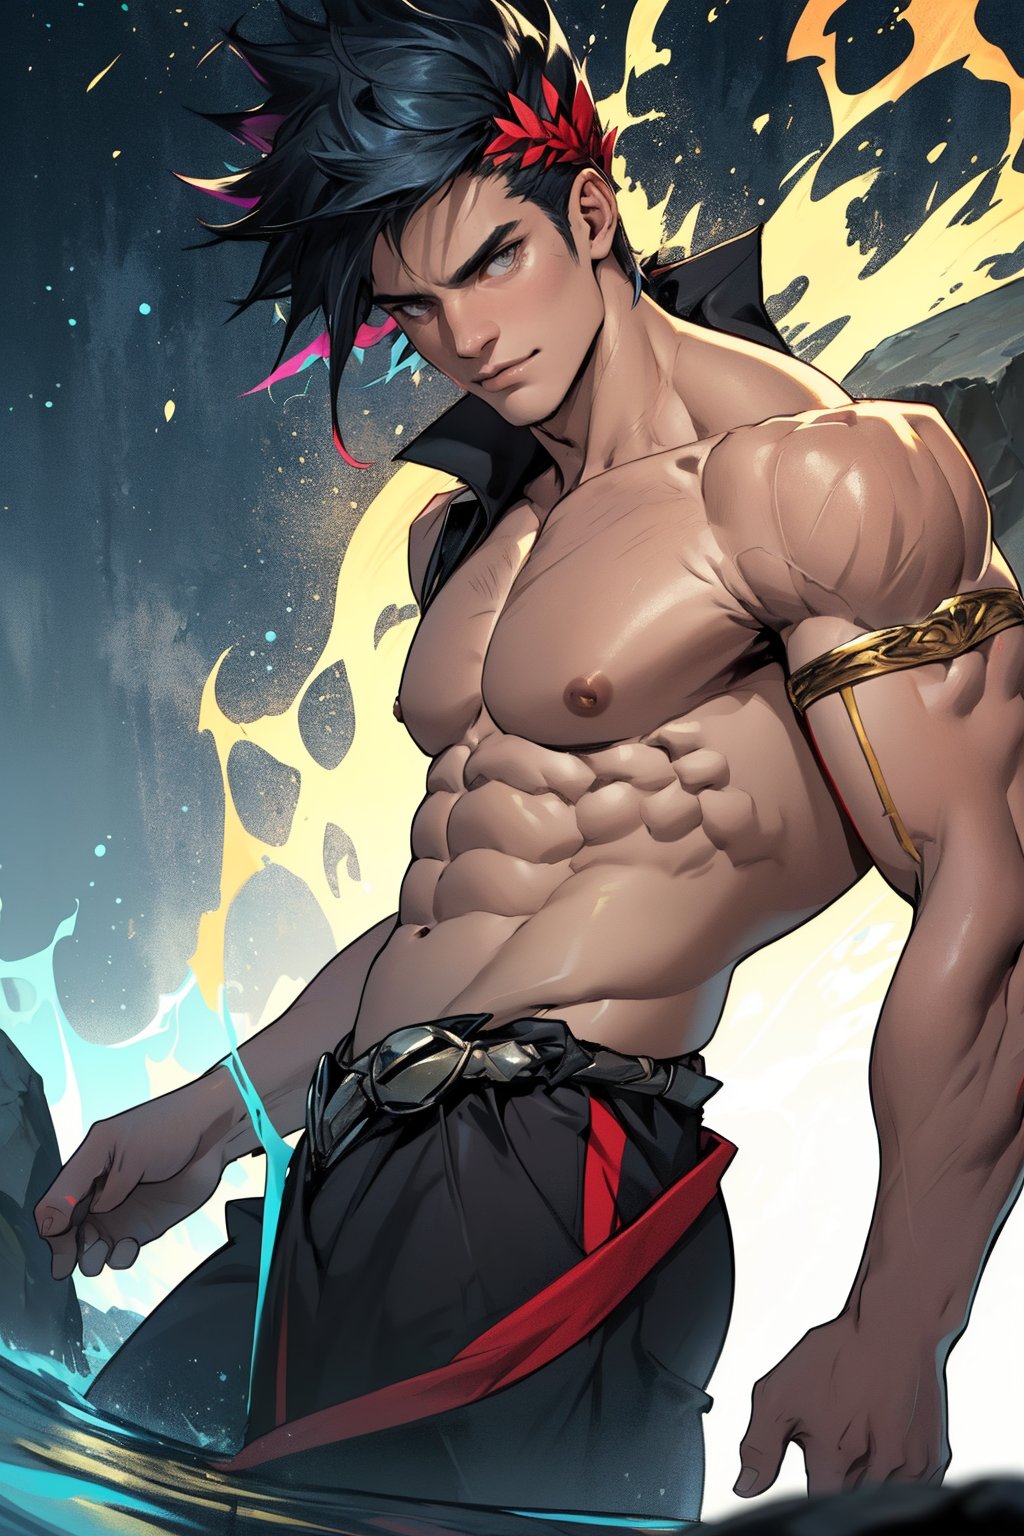 A close-up shot of Zagreus, his chiseled muscles rippling beneath his skin as he poses confidently, his piercing gaze directed straight at the camera. The lighting is warm and golden, highlighting the definition in his physique. In the background, a subtle gradient of dark blues and purples evokes an otherworldly atmosphere. Zagreus' rugged features seem carved from stone, his sharp jawline and prominent cheekbones accentuating his powerful build.